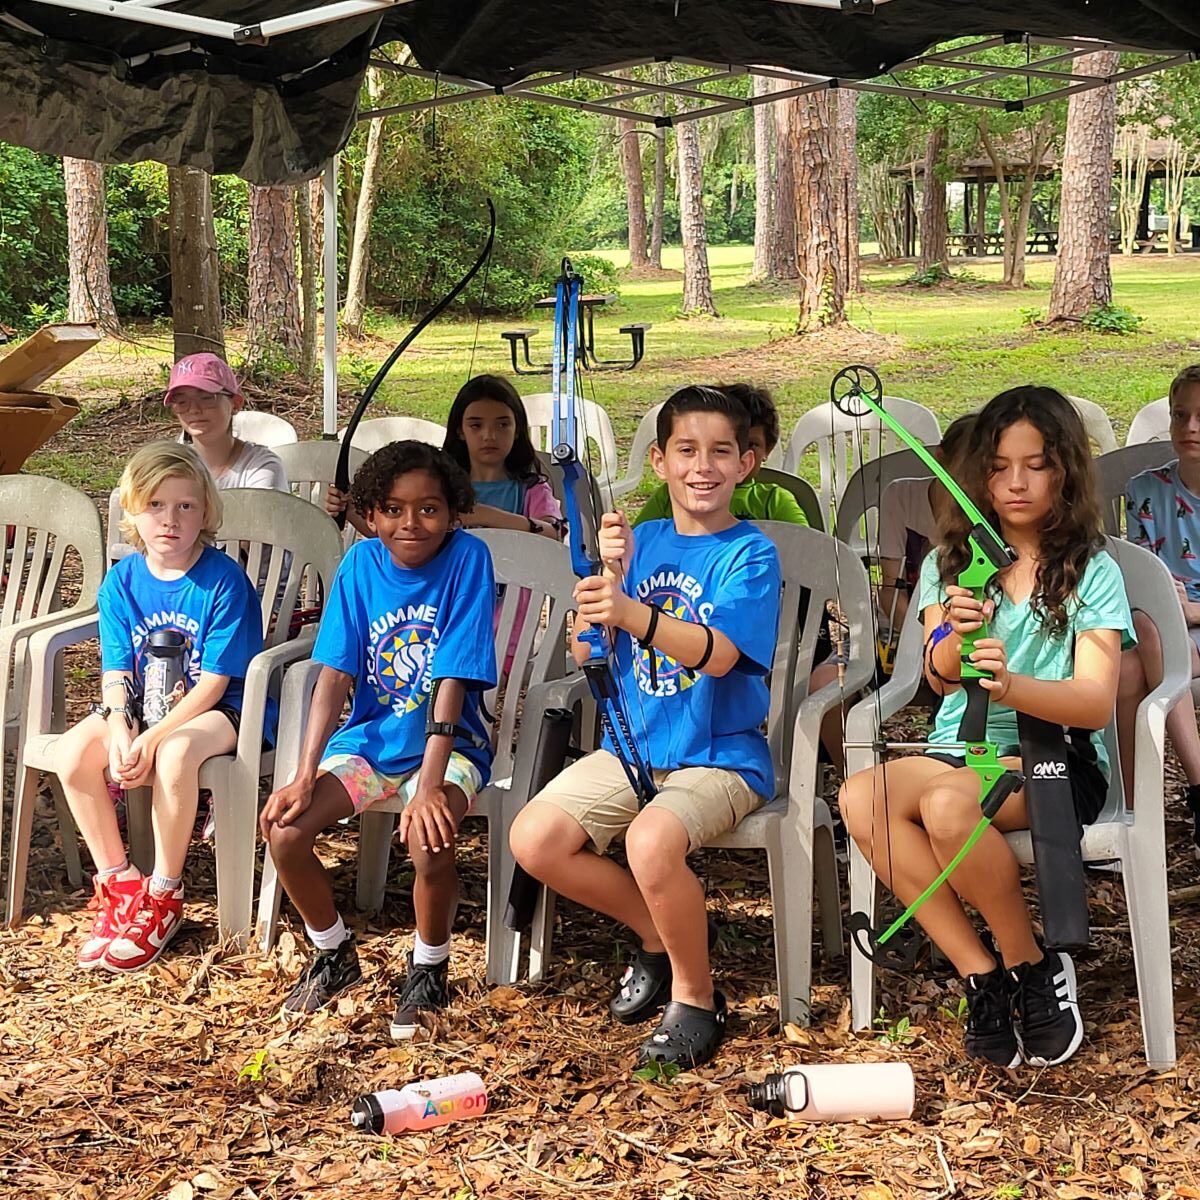 A group of children sitting in chairs under a tent.